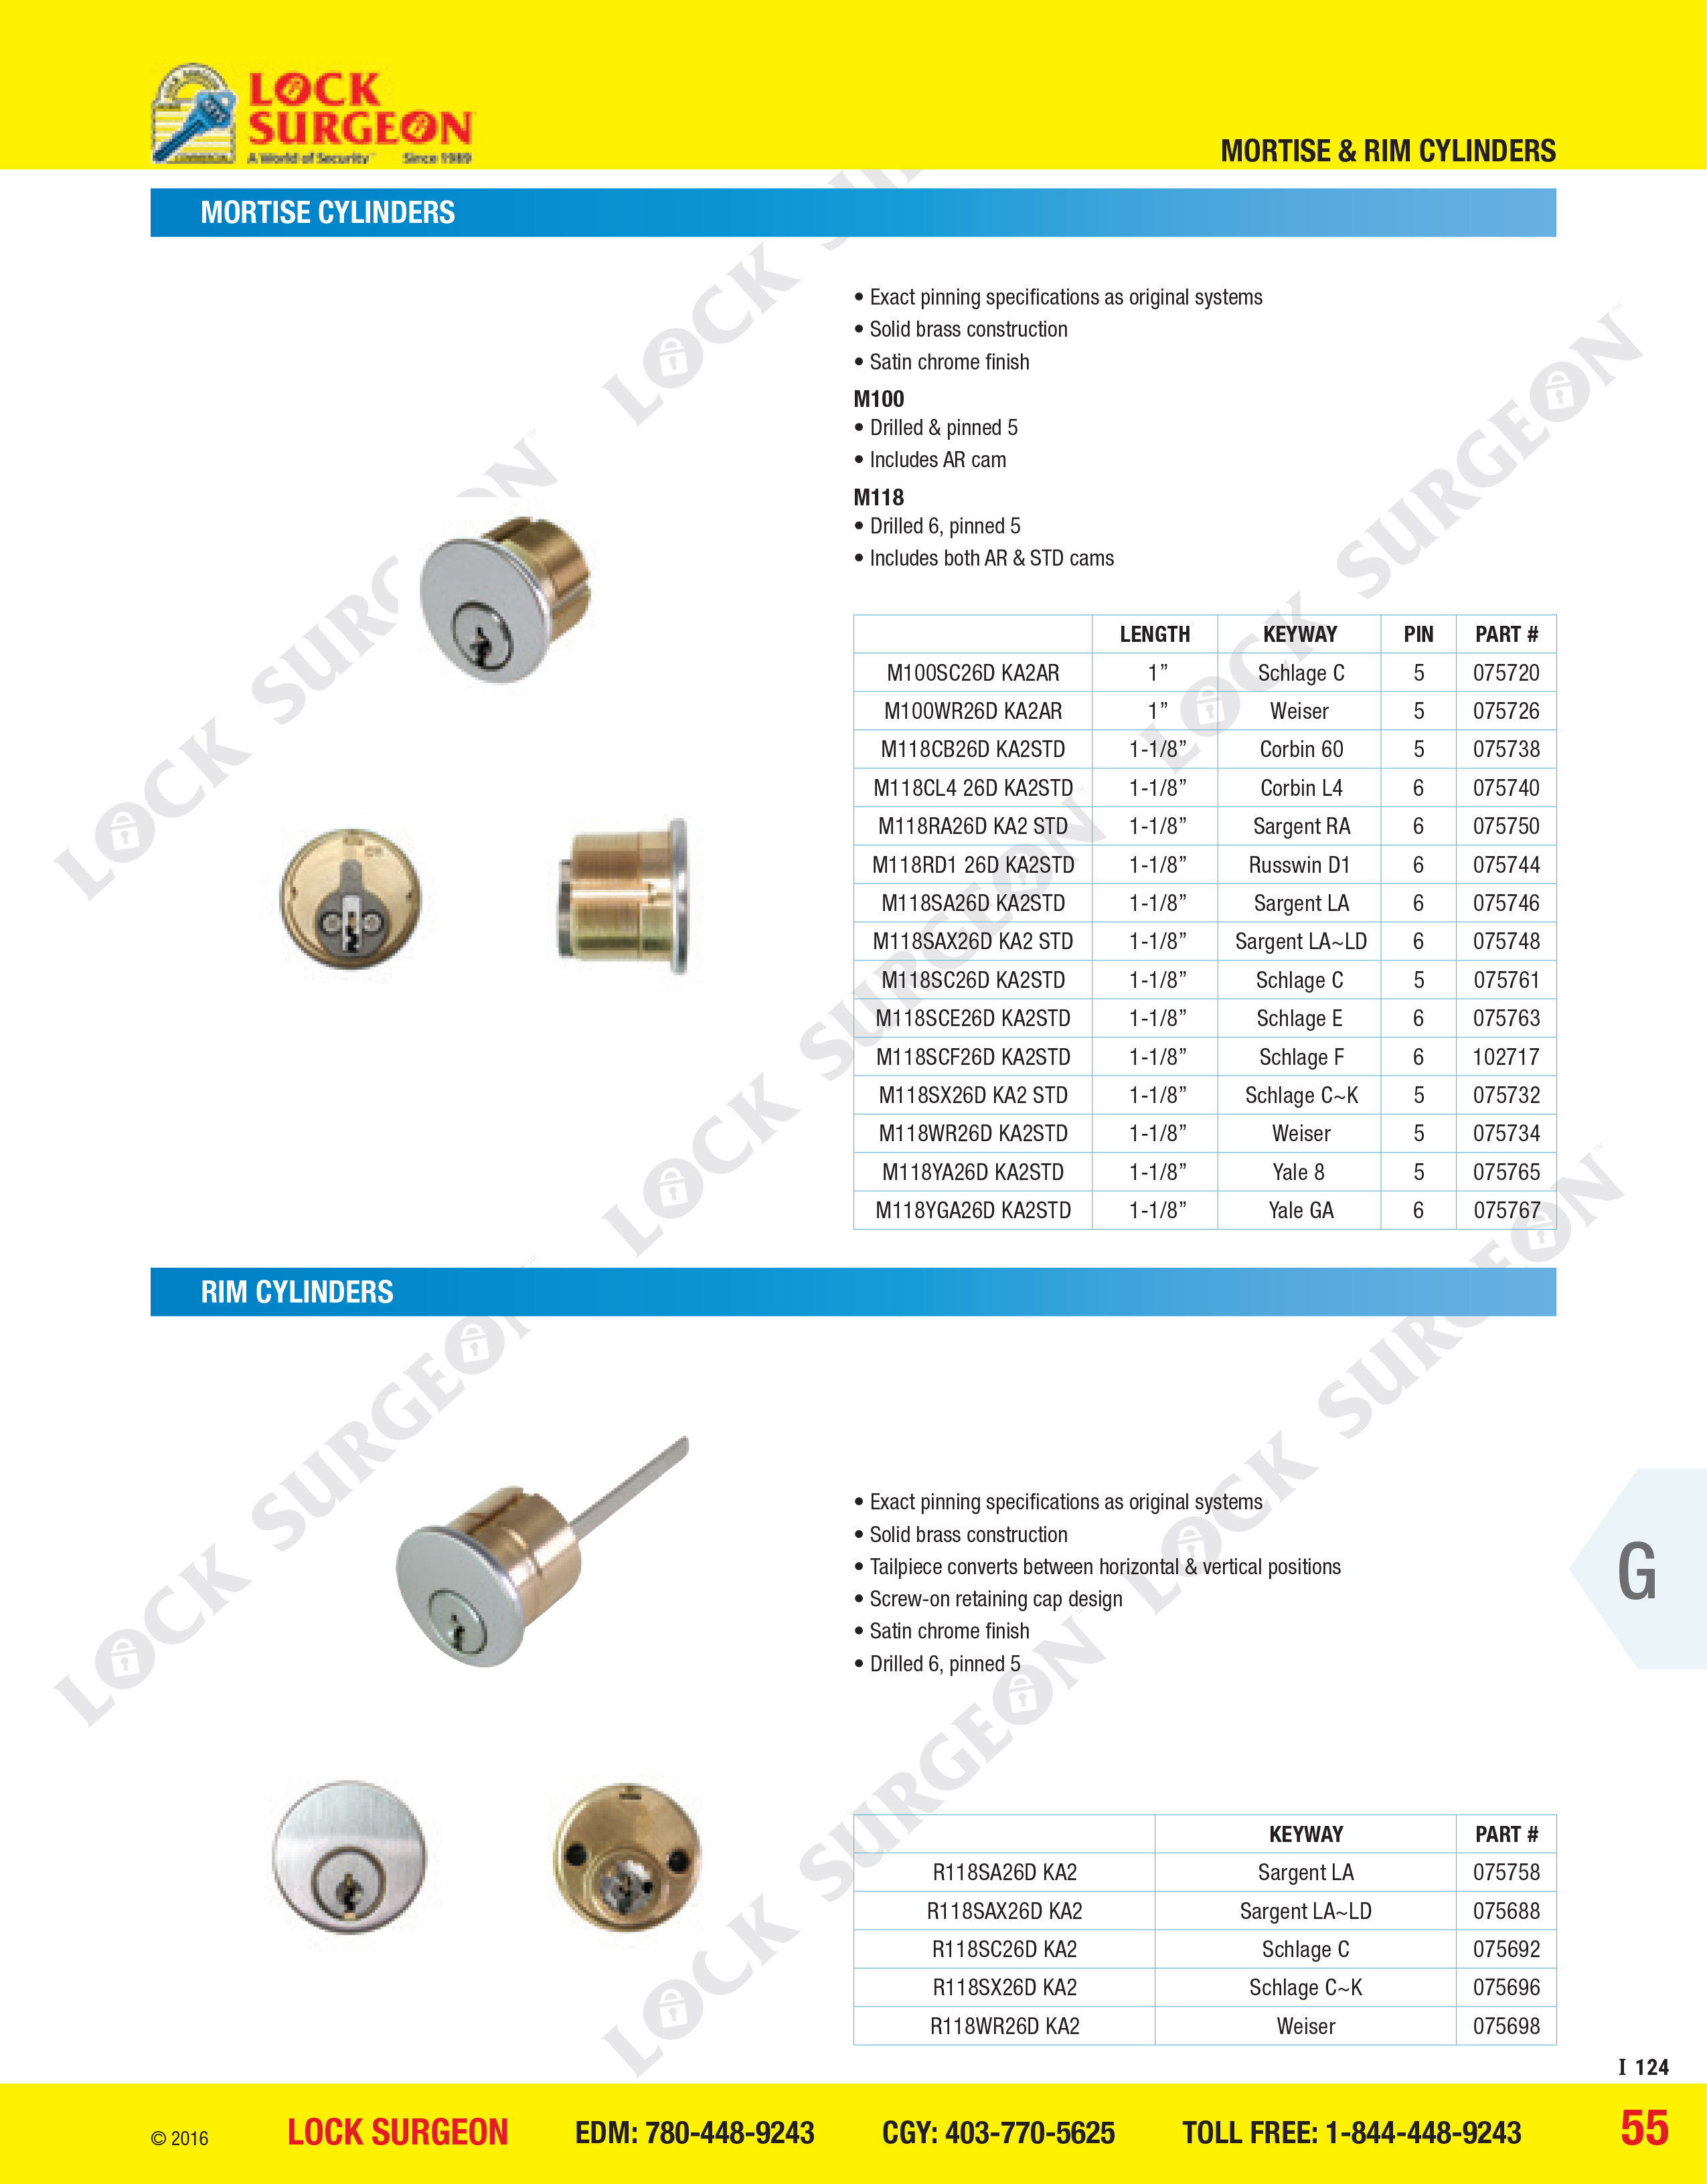 Morinville GMS mortise and rim cylinders solid brass construction satin chrome finish.